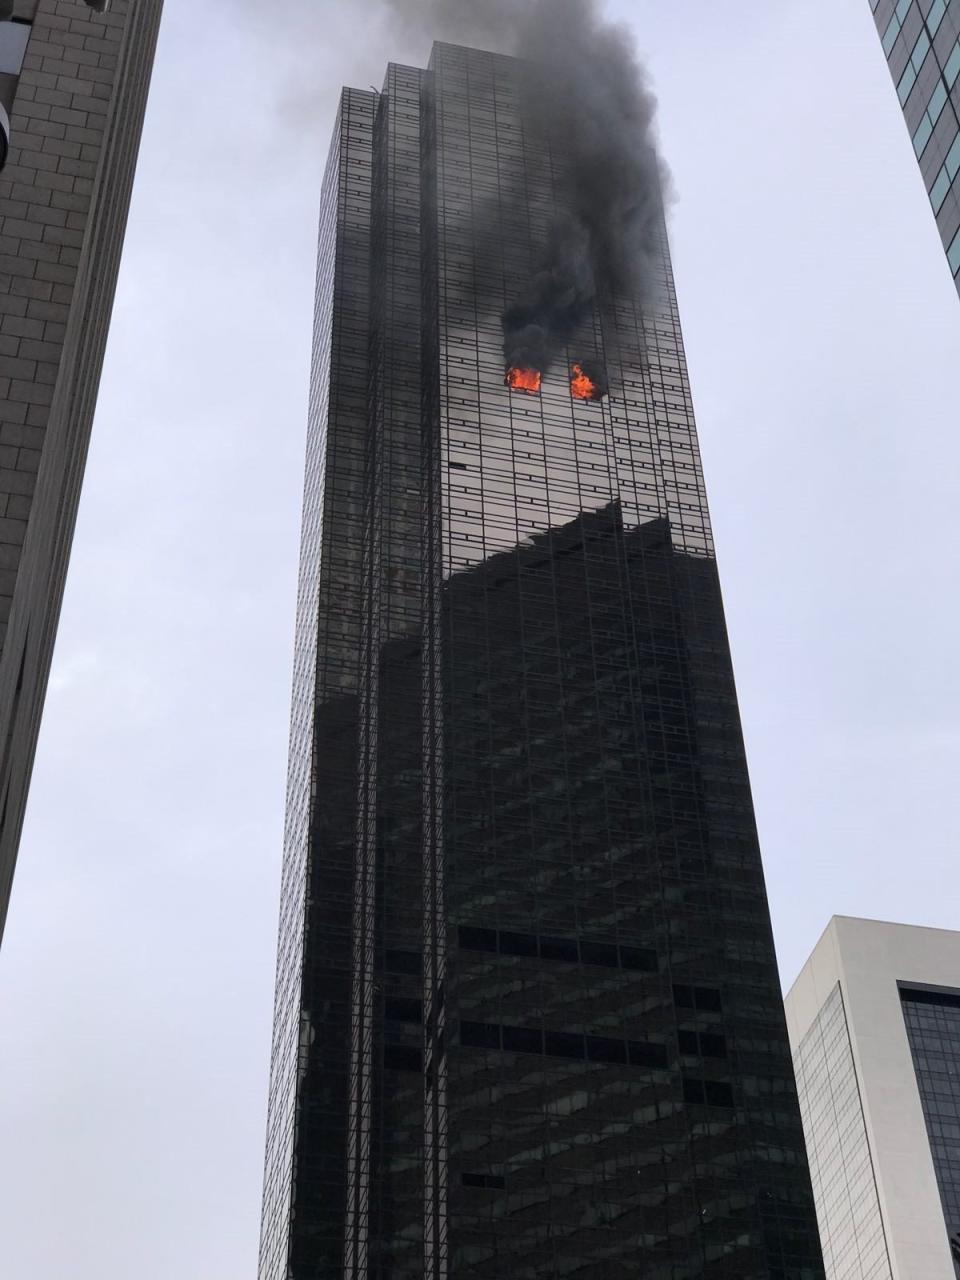 Smoke rises from the 50th floor of Trump Tower in Manhattan on April 7. (Photo: Muhammed Said Tani/Anadolu Agency via Getty Images)